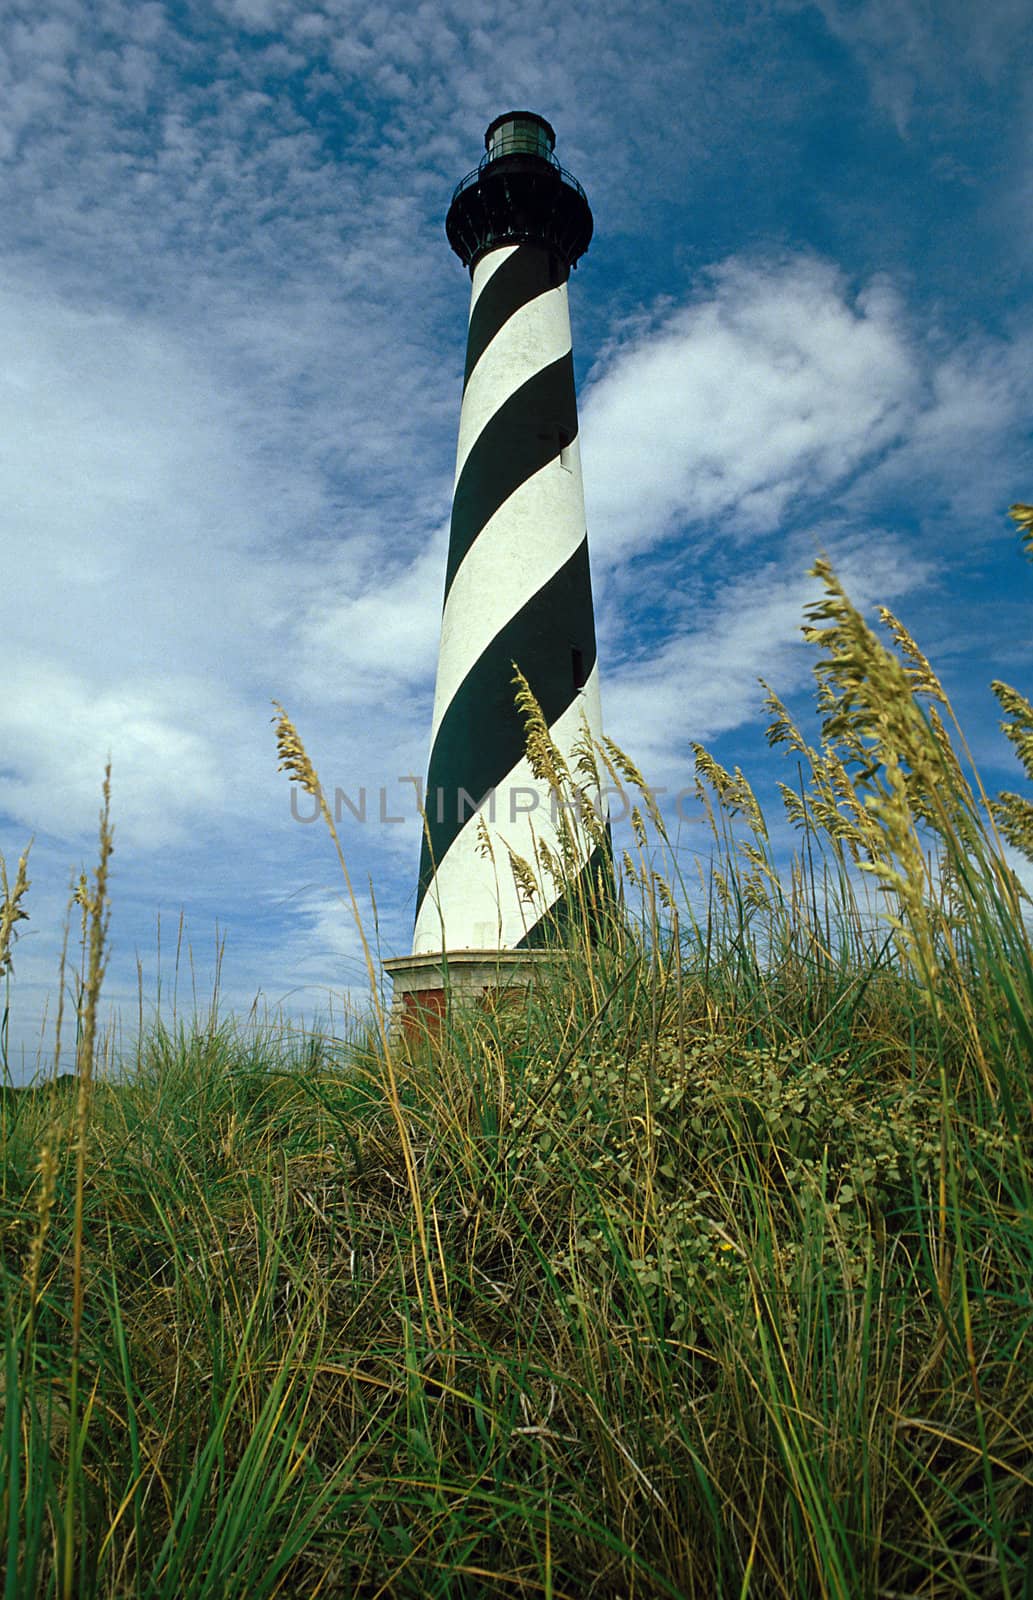 Cape Hatteras Lighthouse with Sea Oats in Forground